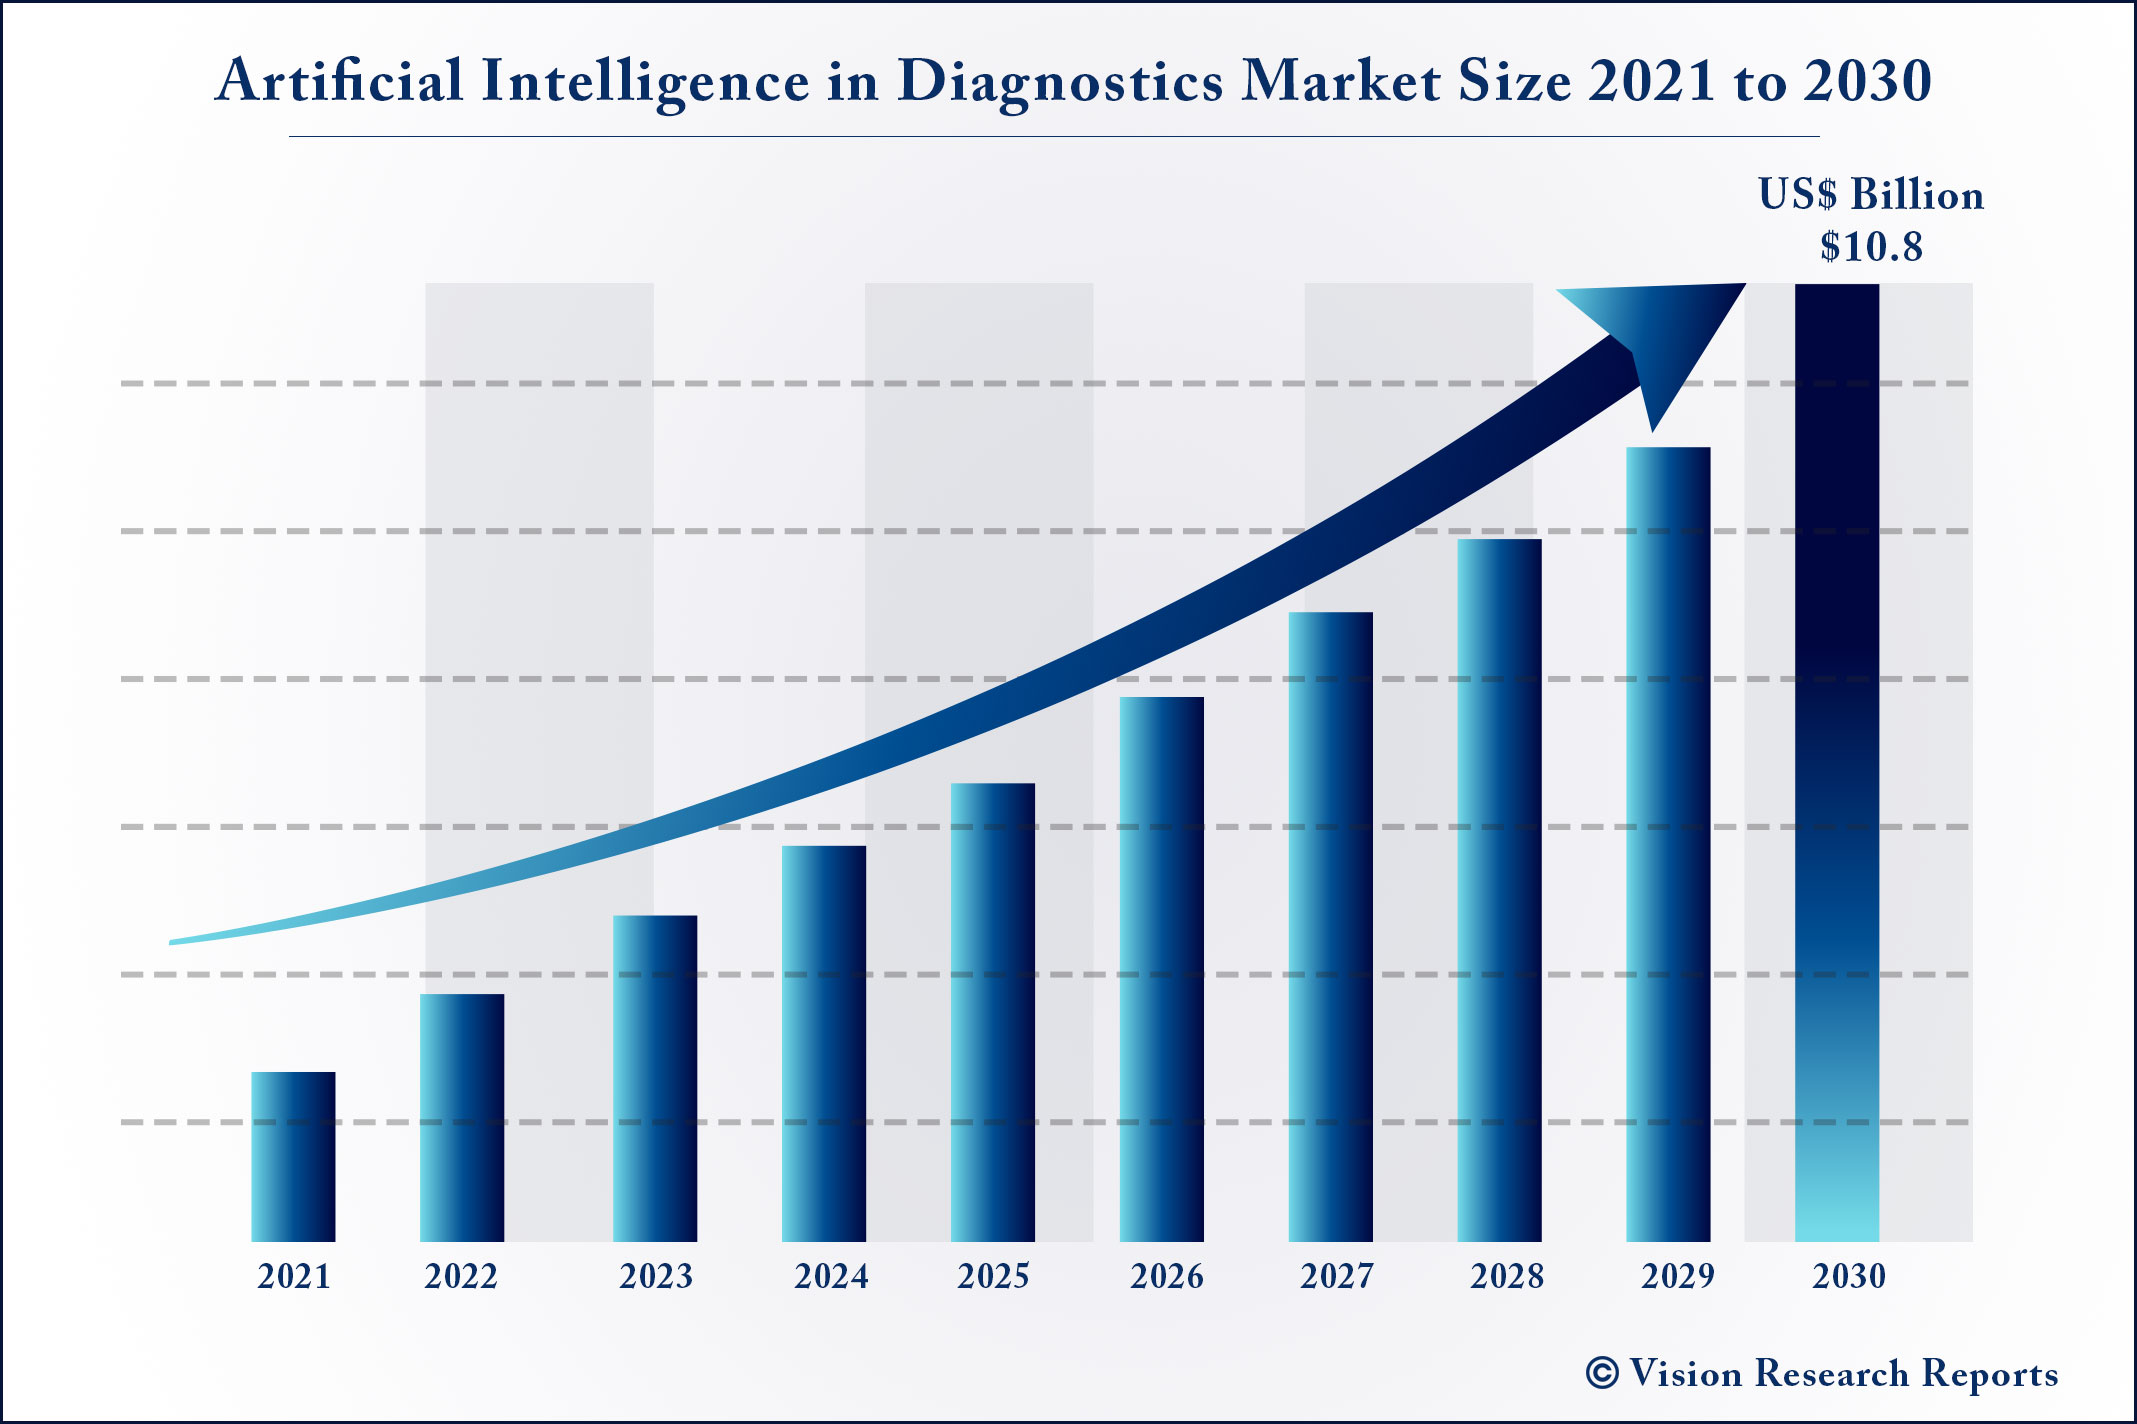 Artificial Intelligence in Diagnostics Market Size 2021 to 2030